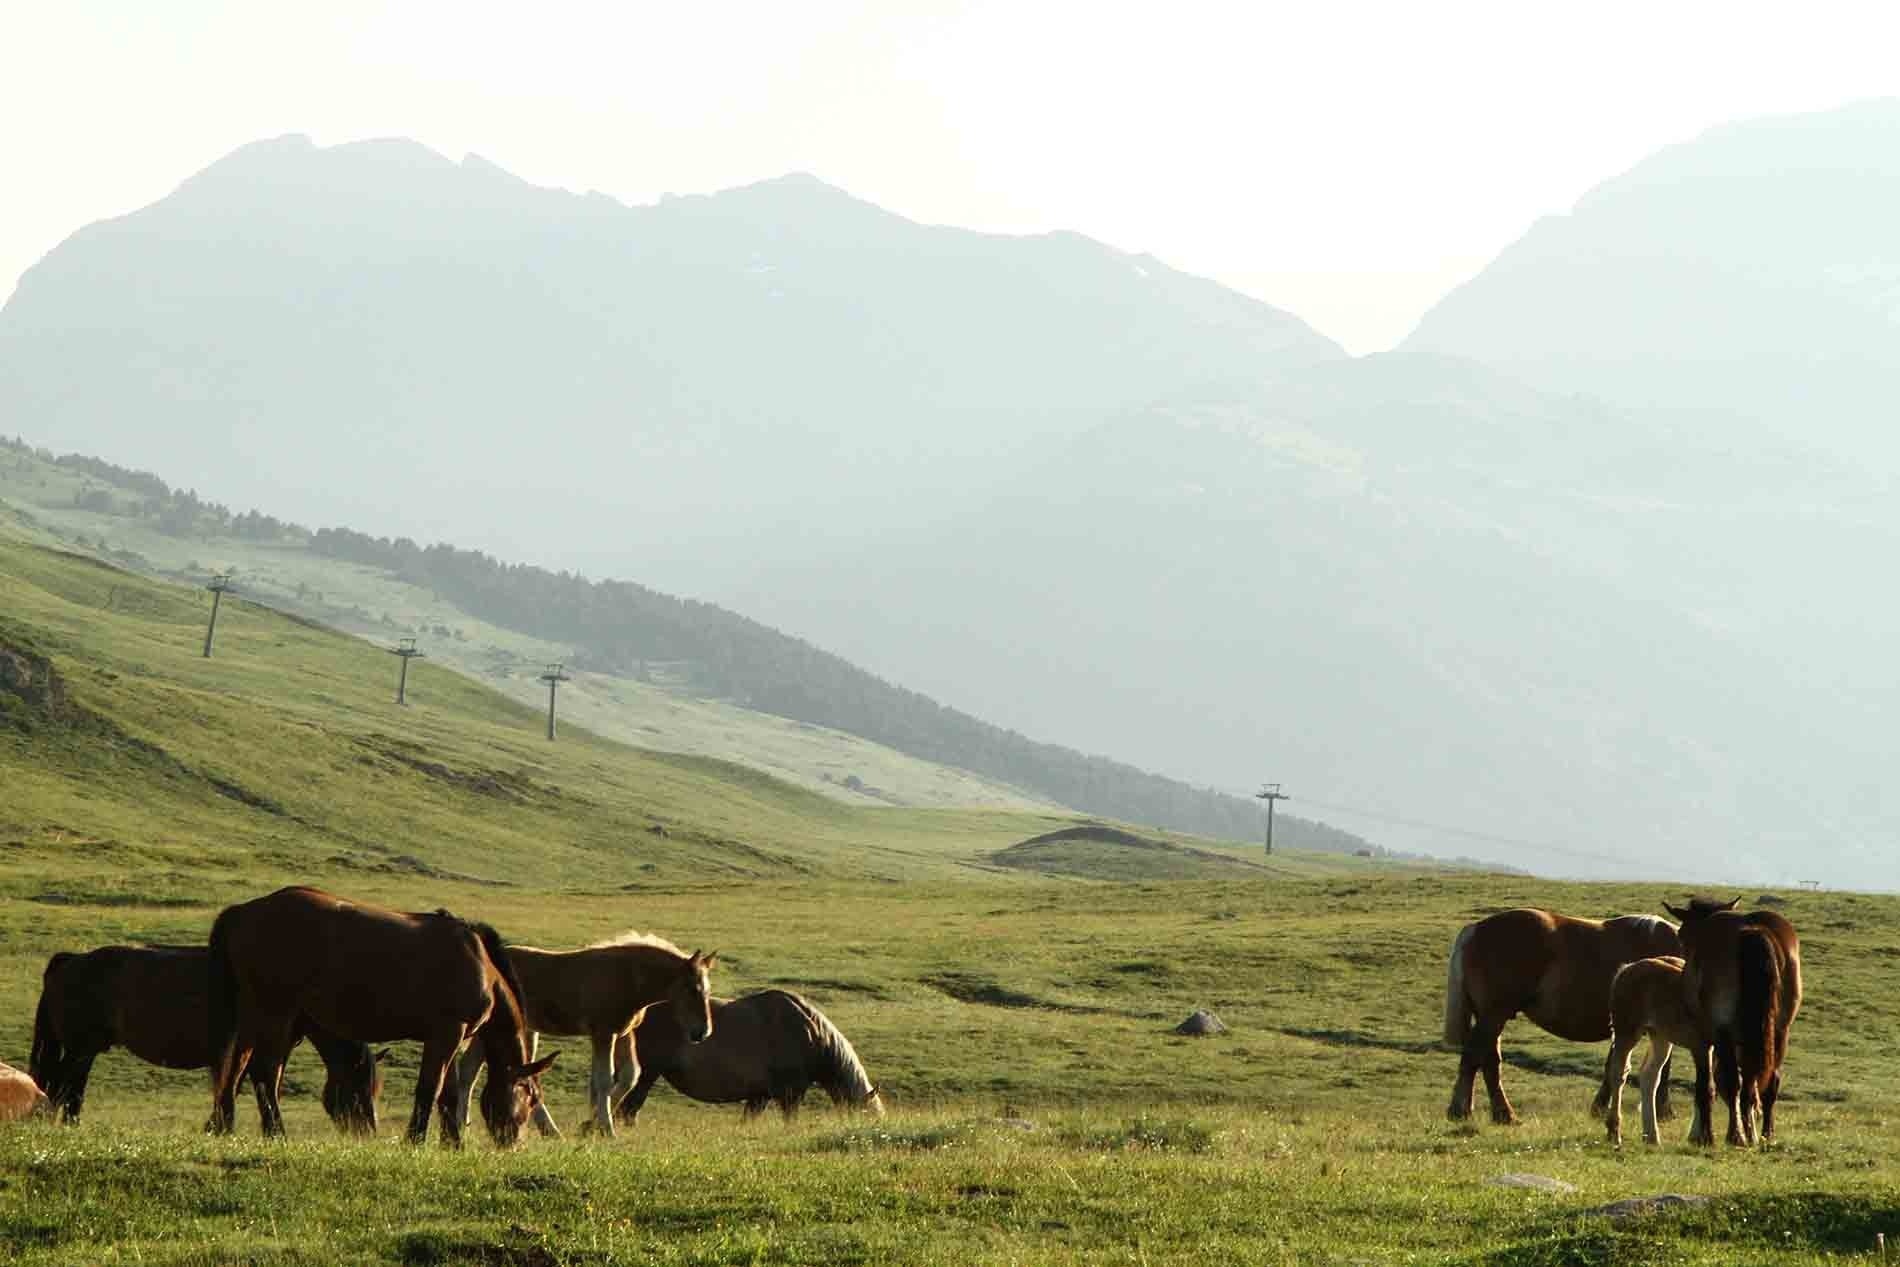 a herd of horses grazing in a field with mountains in the background